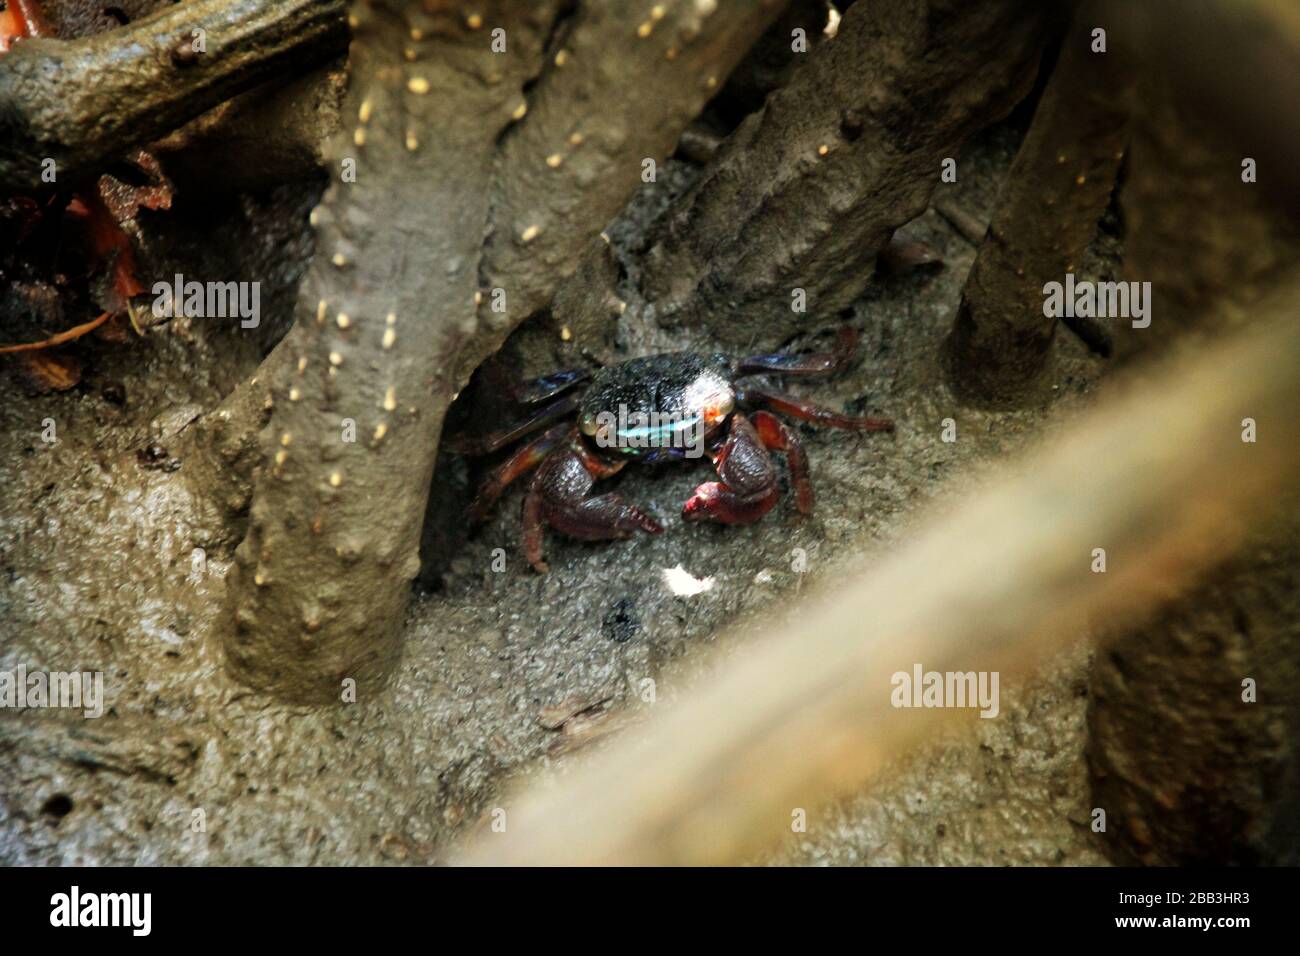 Uca tetragonon, a species of fiddler crab  commonly found in mangrove areas Stock Photo